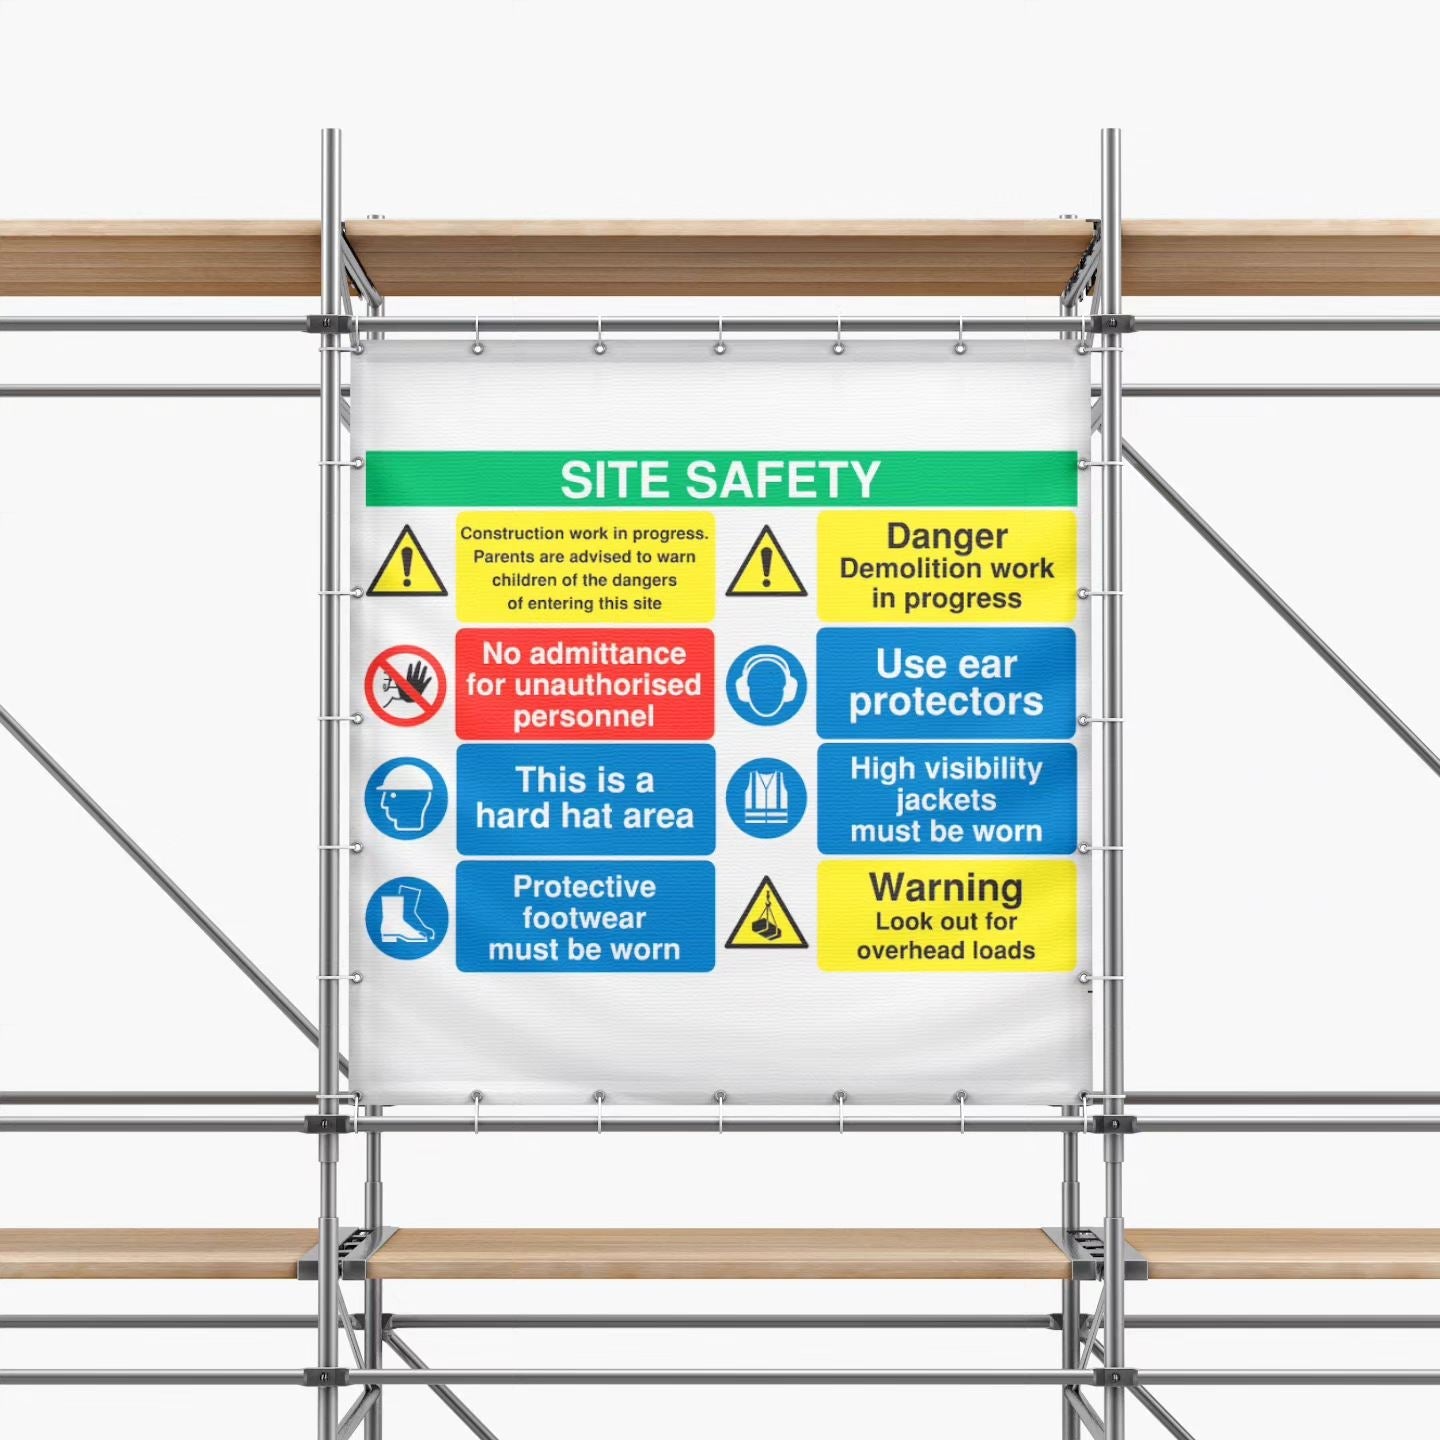 Scaffold with safety site banner hung on it